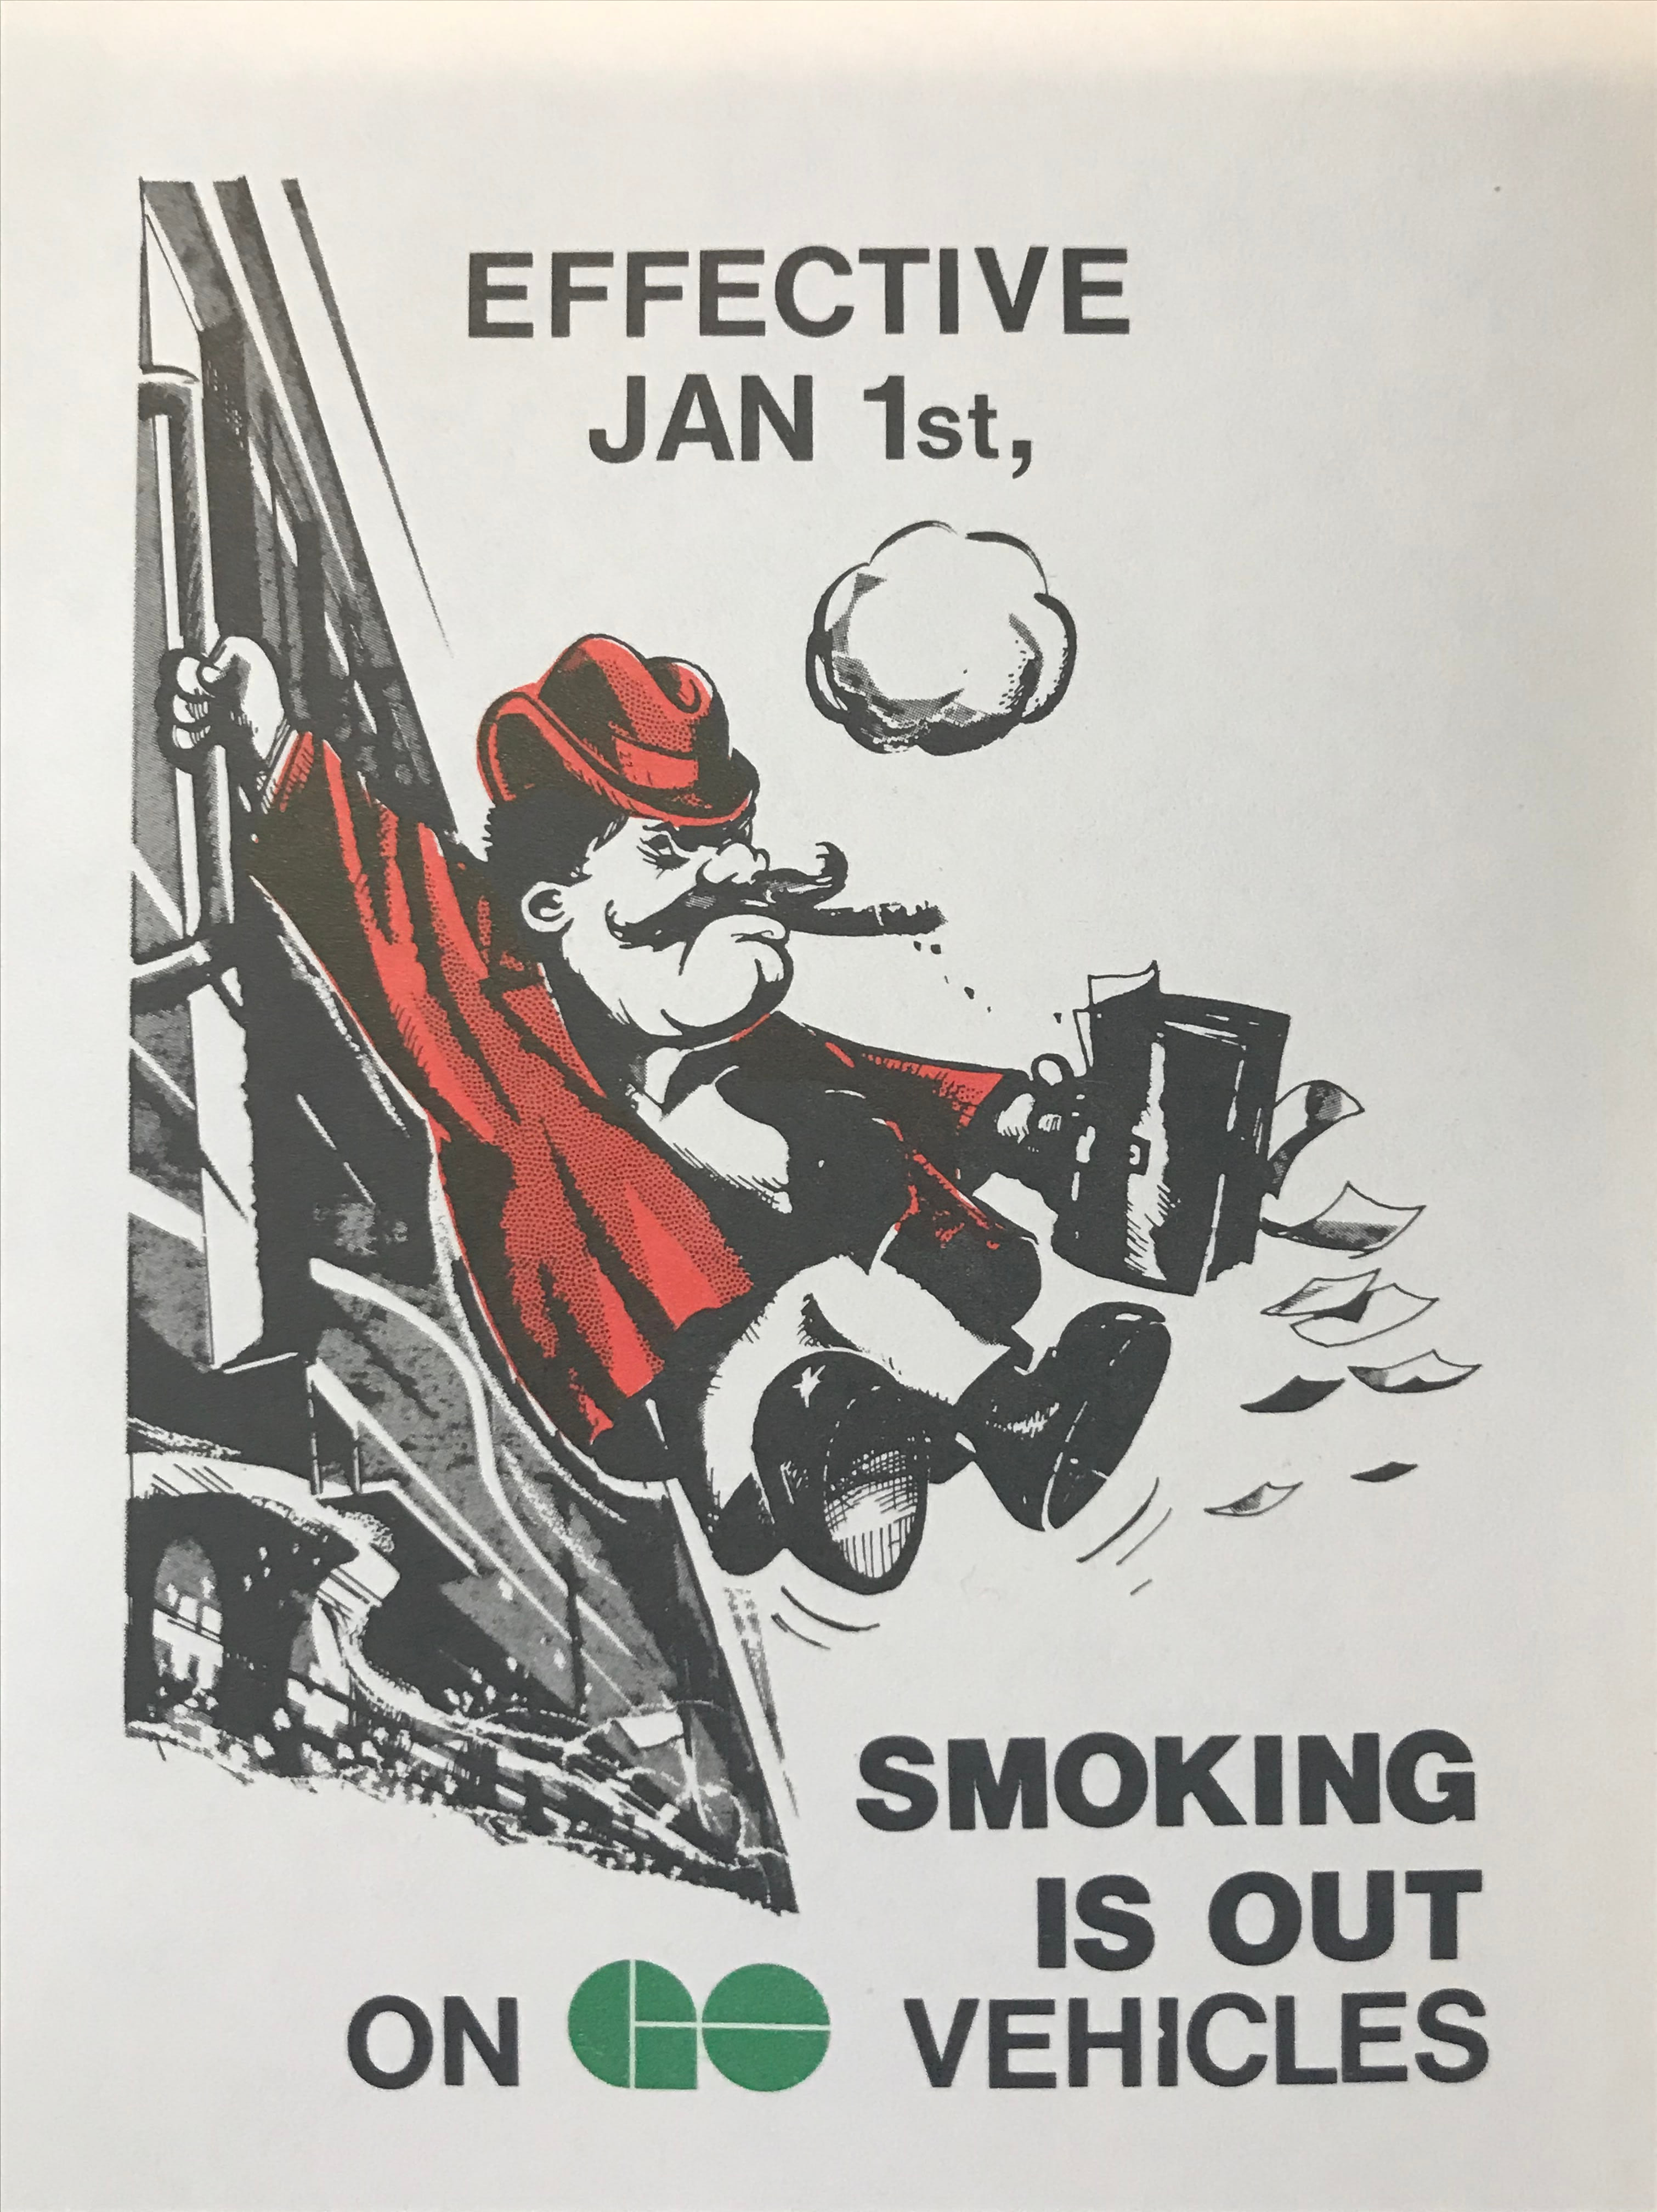 A a pamphlet from 1977 that shows a cartoon commuter with a cigarette